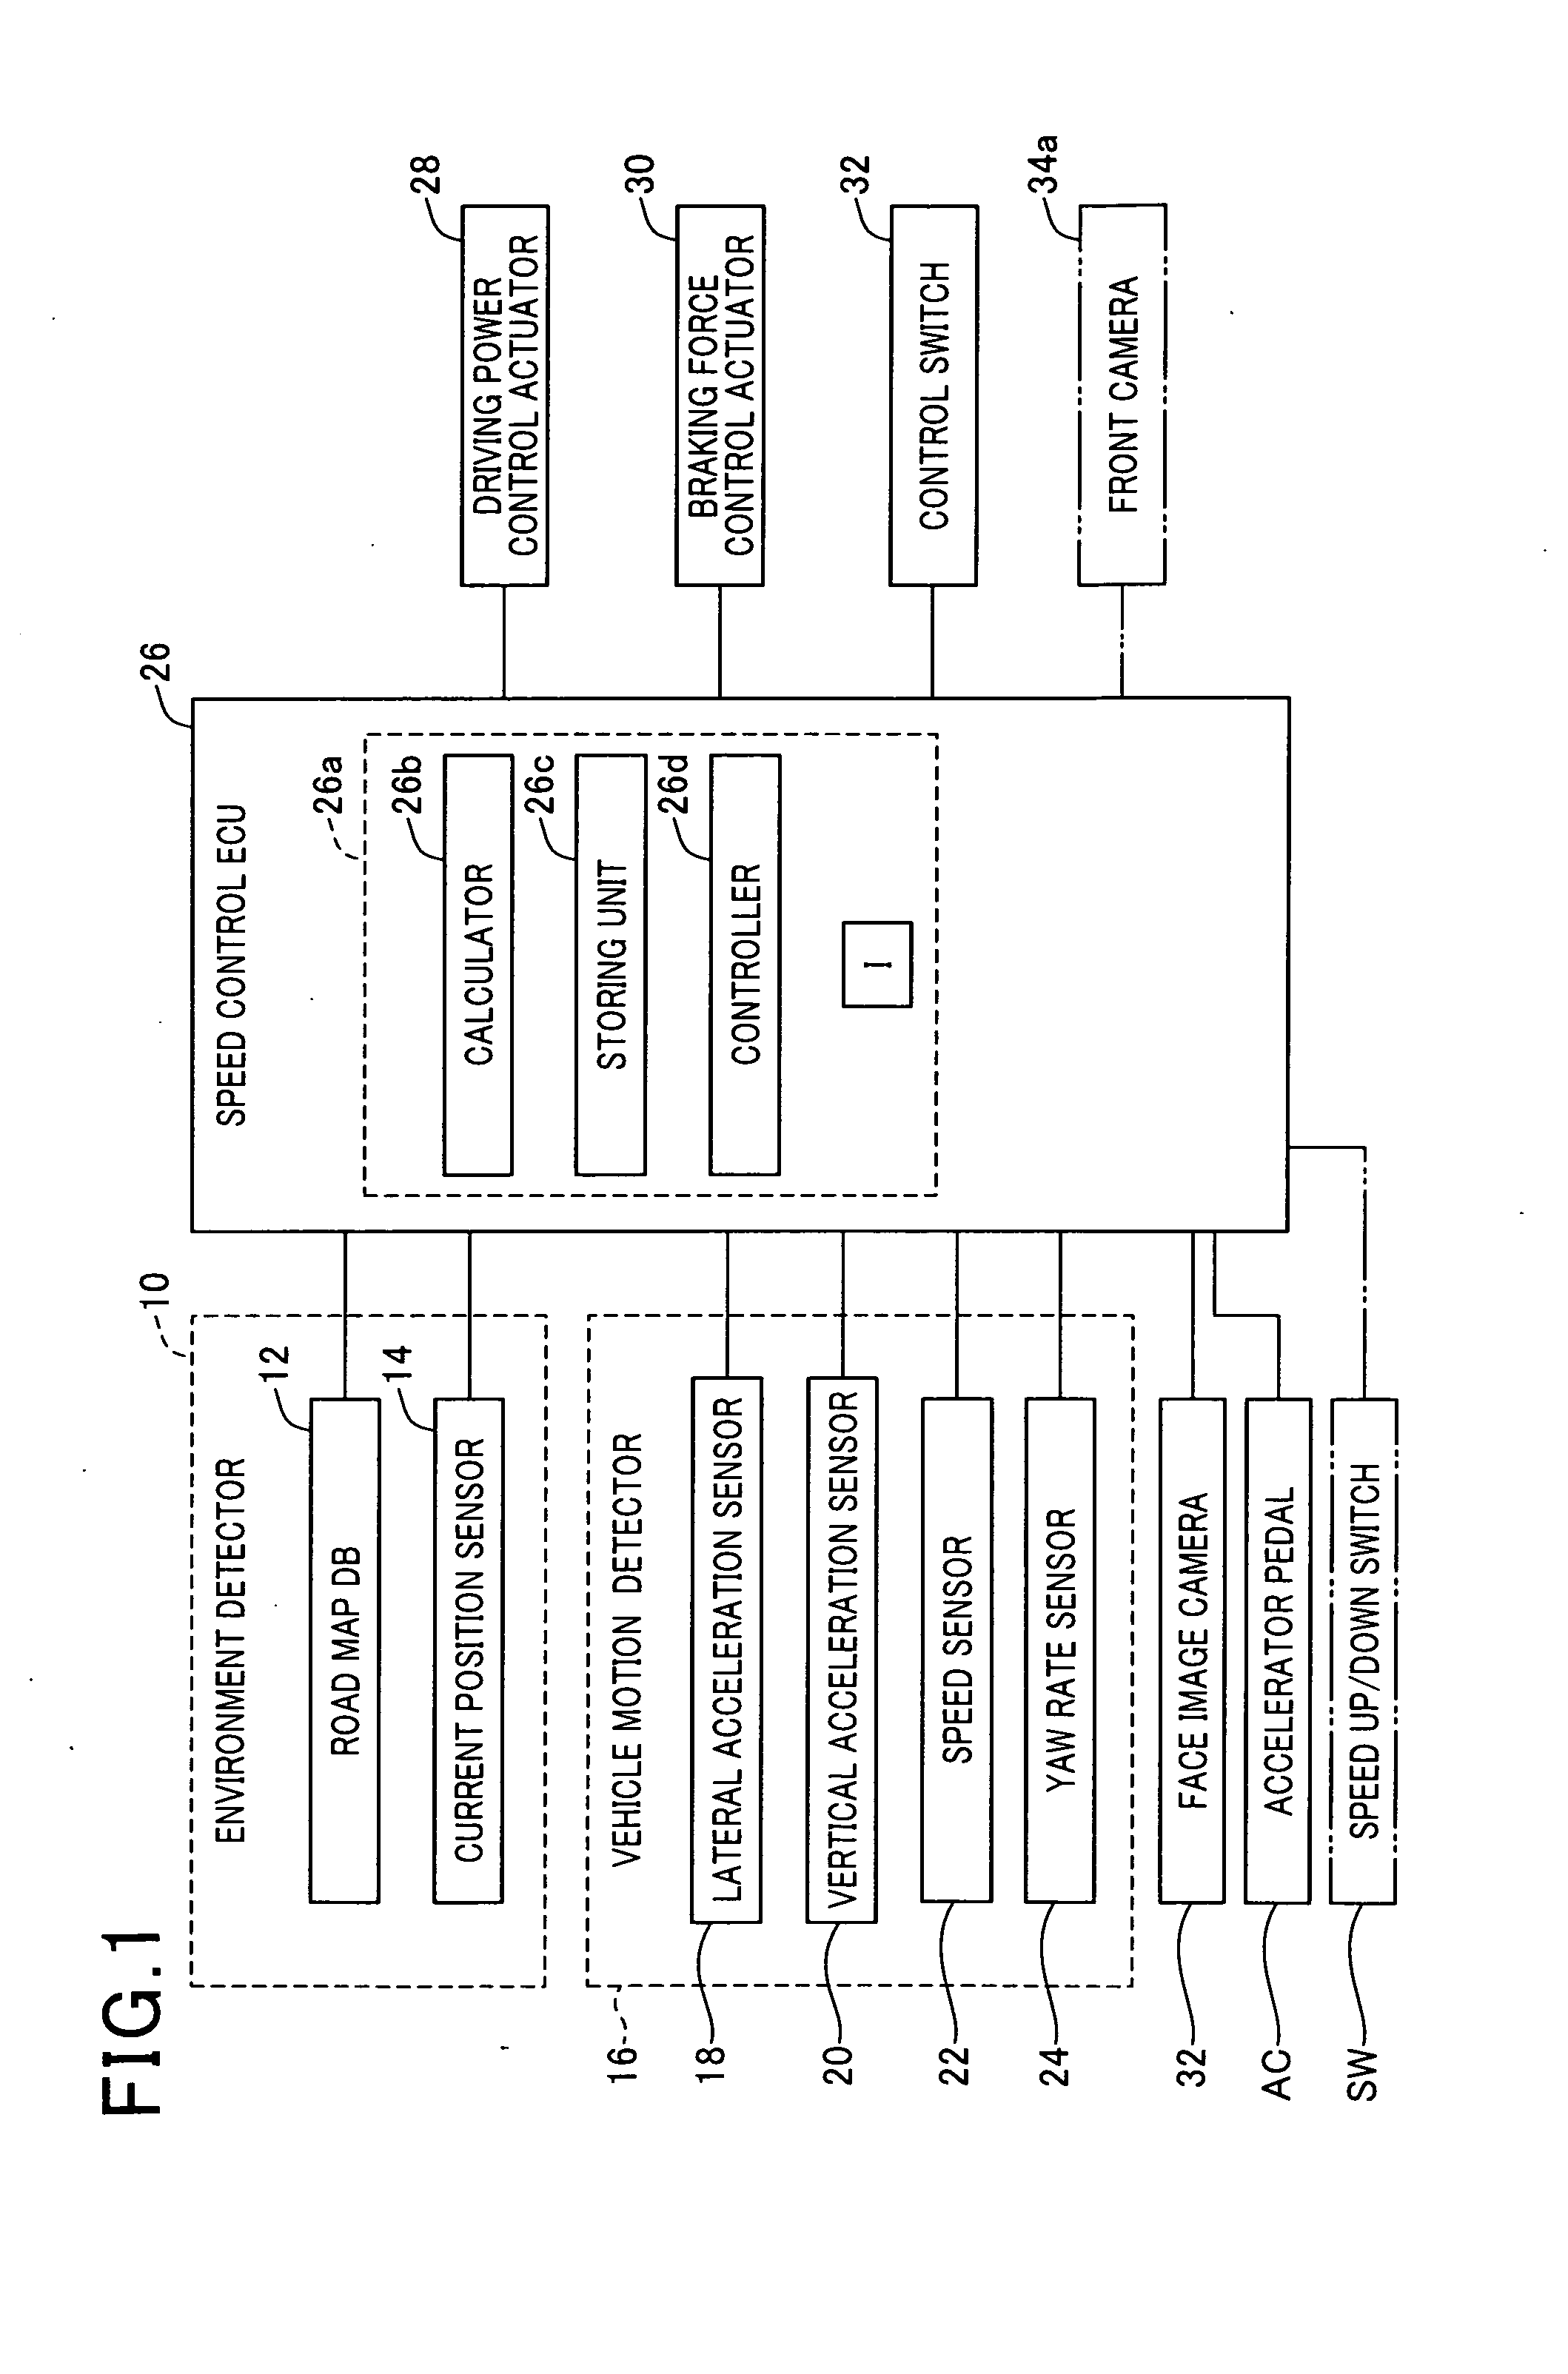 Apparatus for controlling speed of mobile object